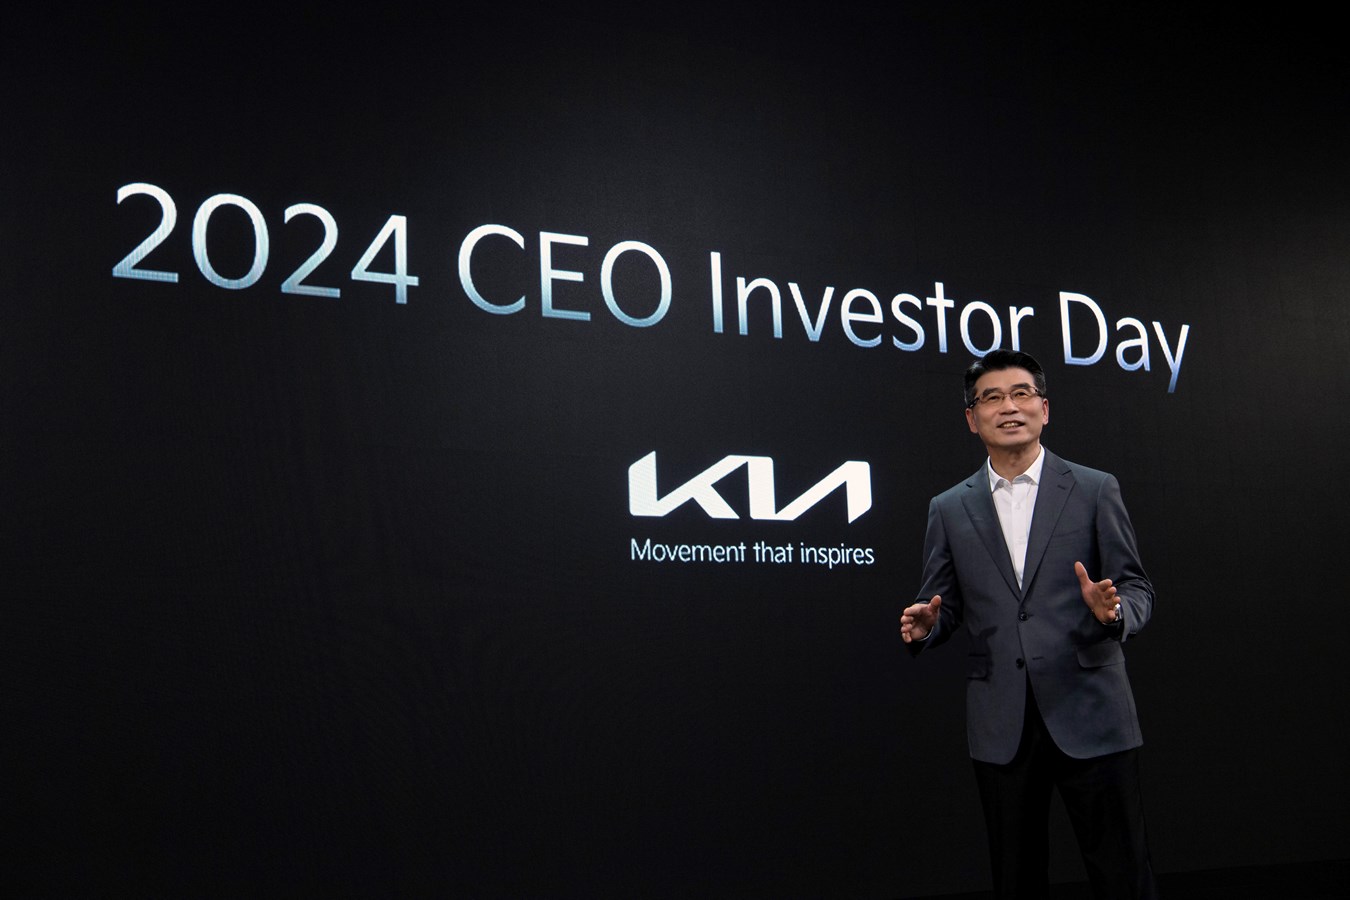 Kia Corporation (Kia) today shared an update on its future strategies and financial targets at its CEO Investor Day in Seoul, Korea.